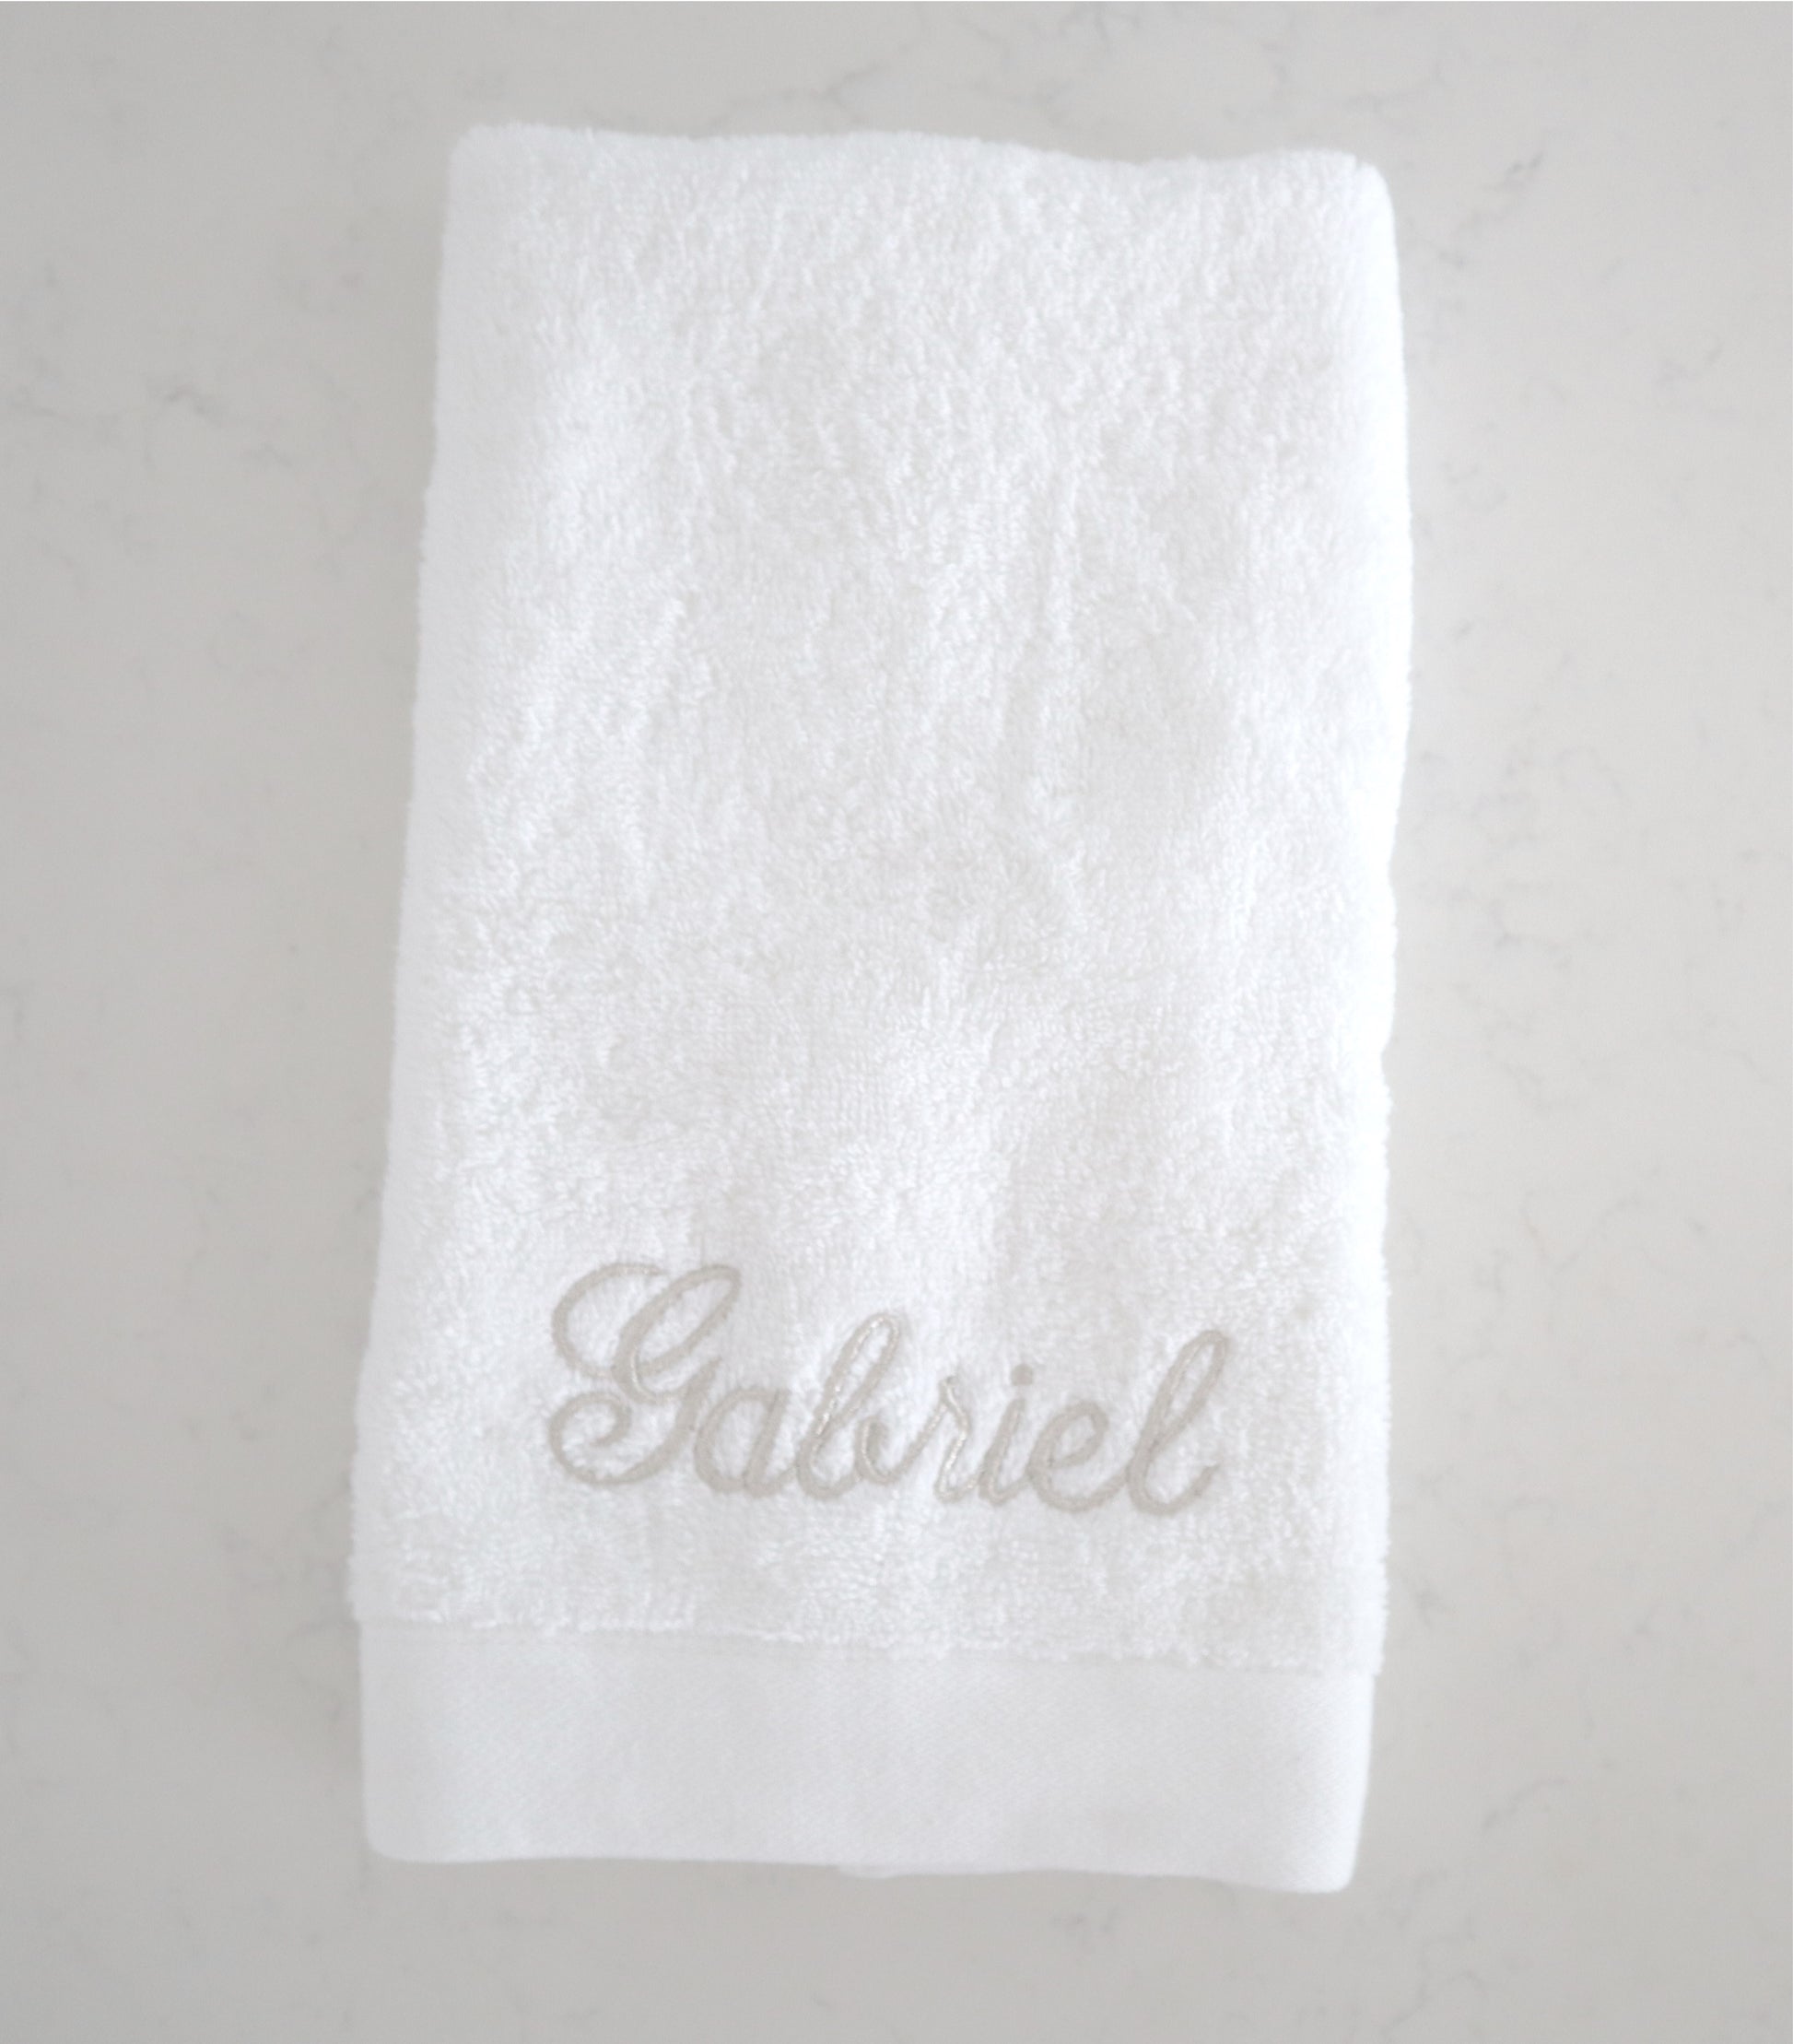 Embroidered Bath Towel in your choice of our fonts and colours